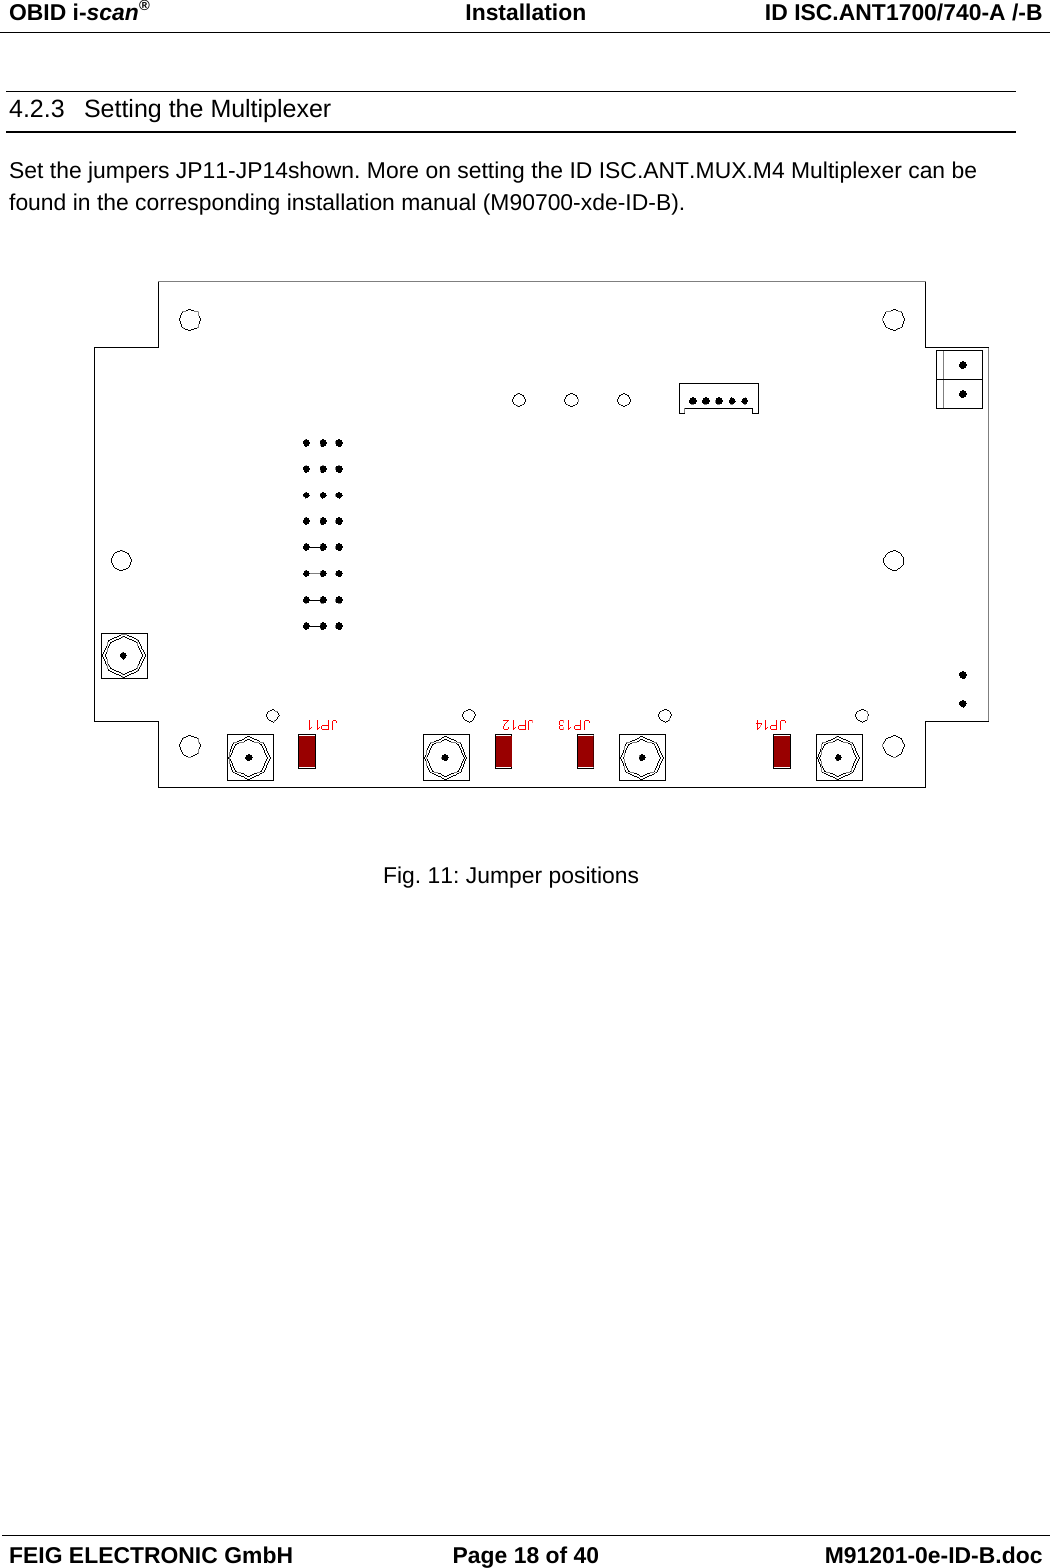 OBID i-scan®   Installation  ID ISC.ANT1700/740-A /-B FEIG ELECTRONIC GmbH  Page 18 of 40  M91201-0e-ID-B.doc 4.2.3  Setting the Multiplexer Set the jumpers JP11-JP14shown. More on setting the ID ISC.ANT.MUX.M4 Multiplexer can be found in the corresponding installation manual (M90700-xde-ID-B).   Fig. 11: Jumper positions        